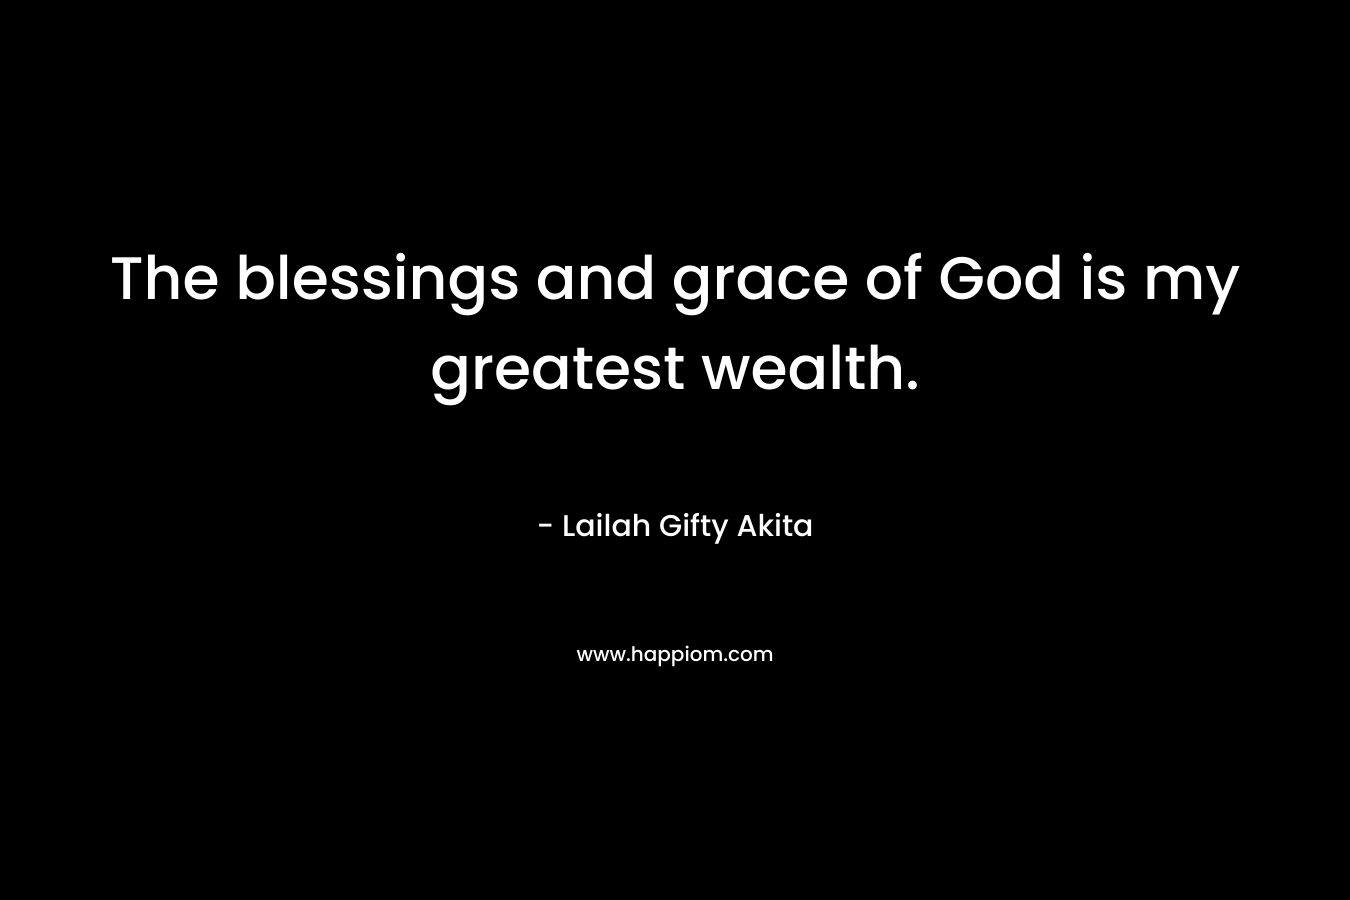 The blessings and grace of God is my greatest wealth.